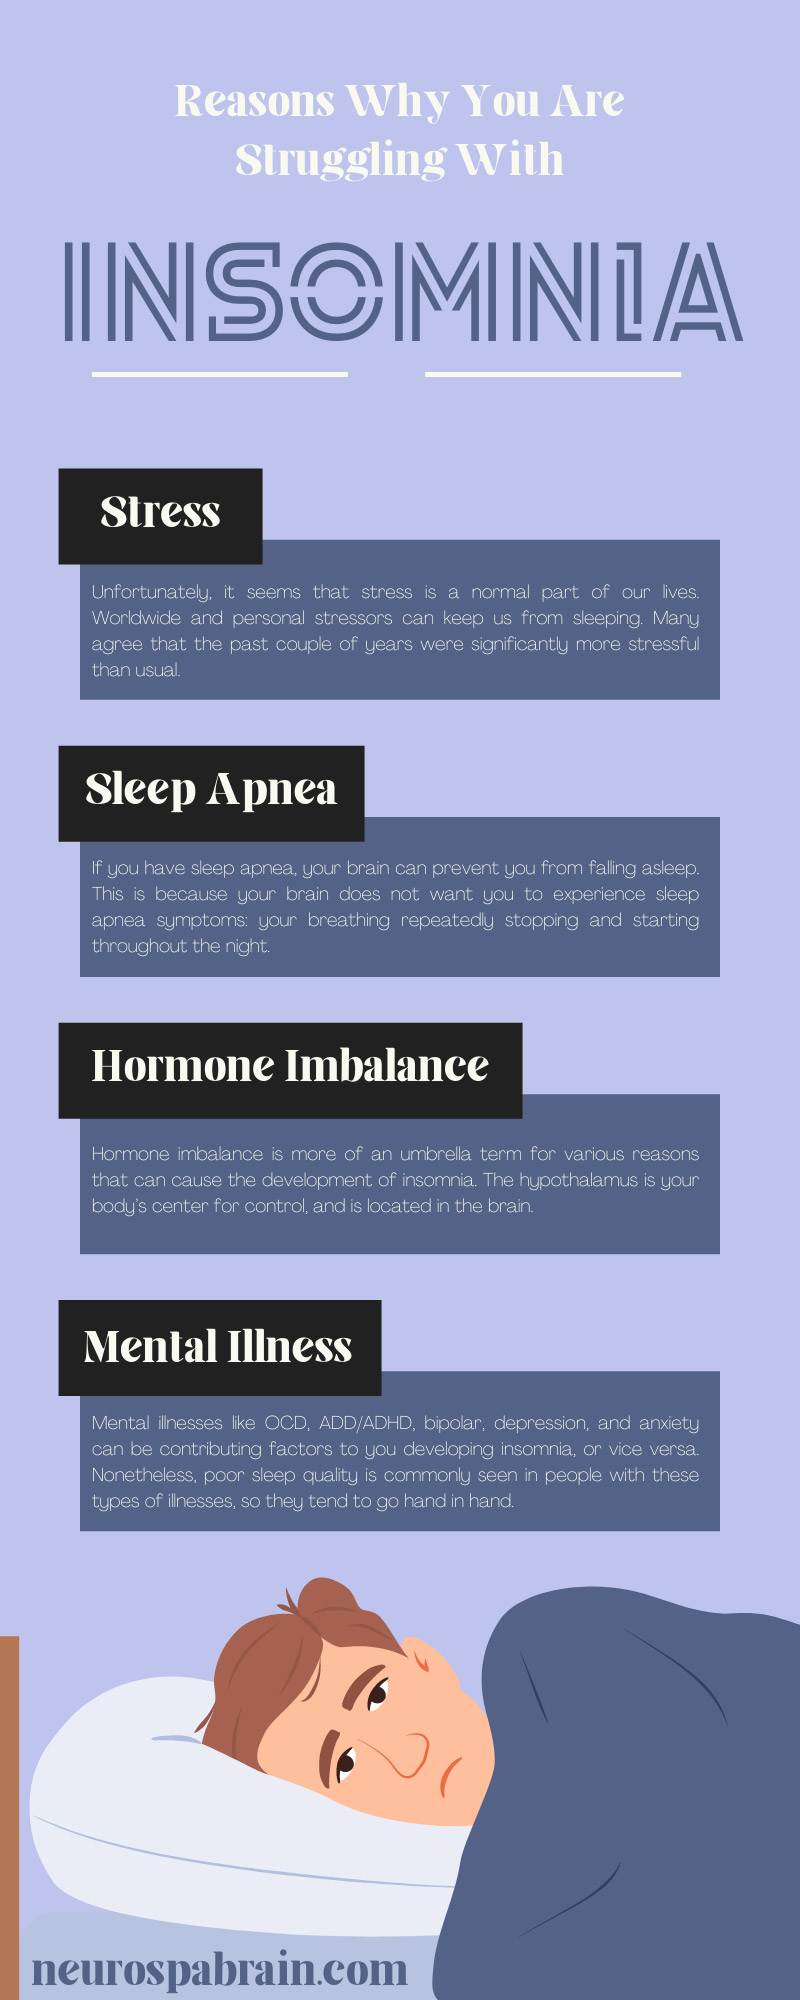 Reasons Why You Are Struggling With Insomnia